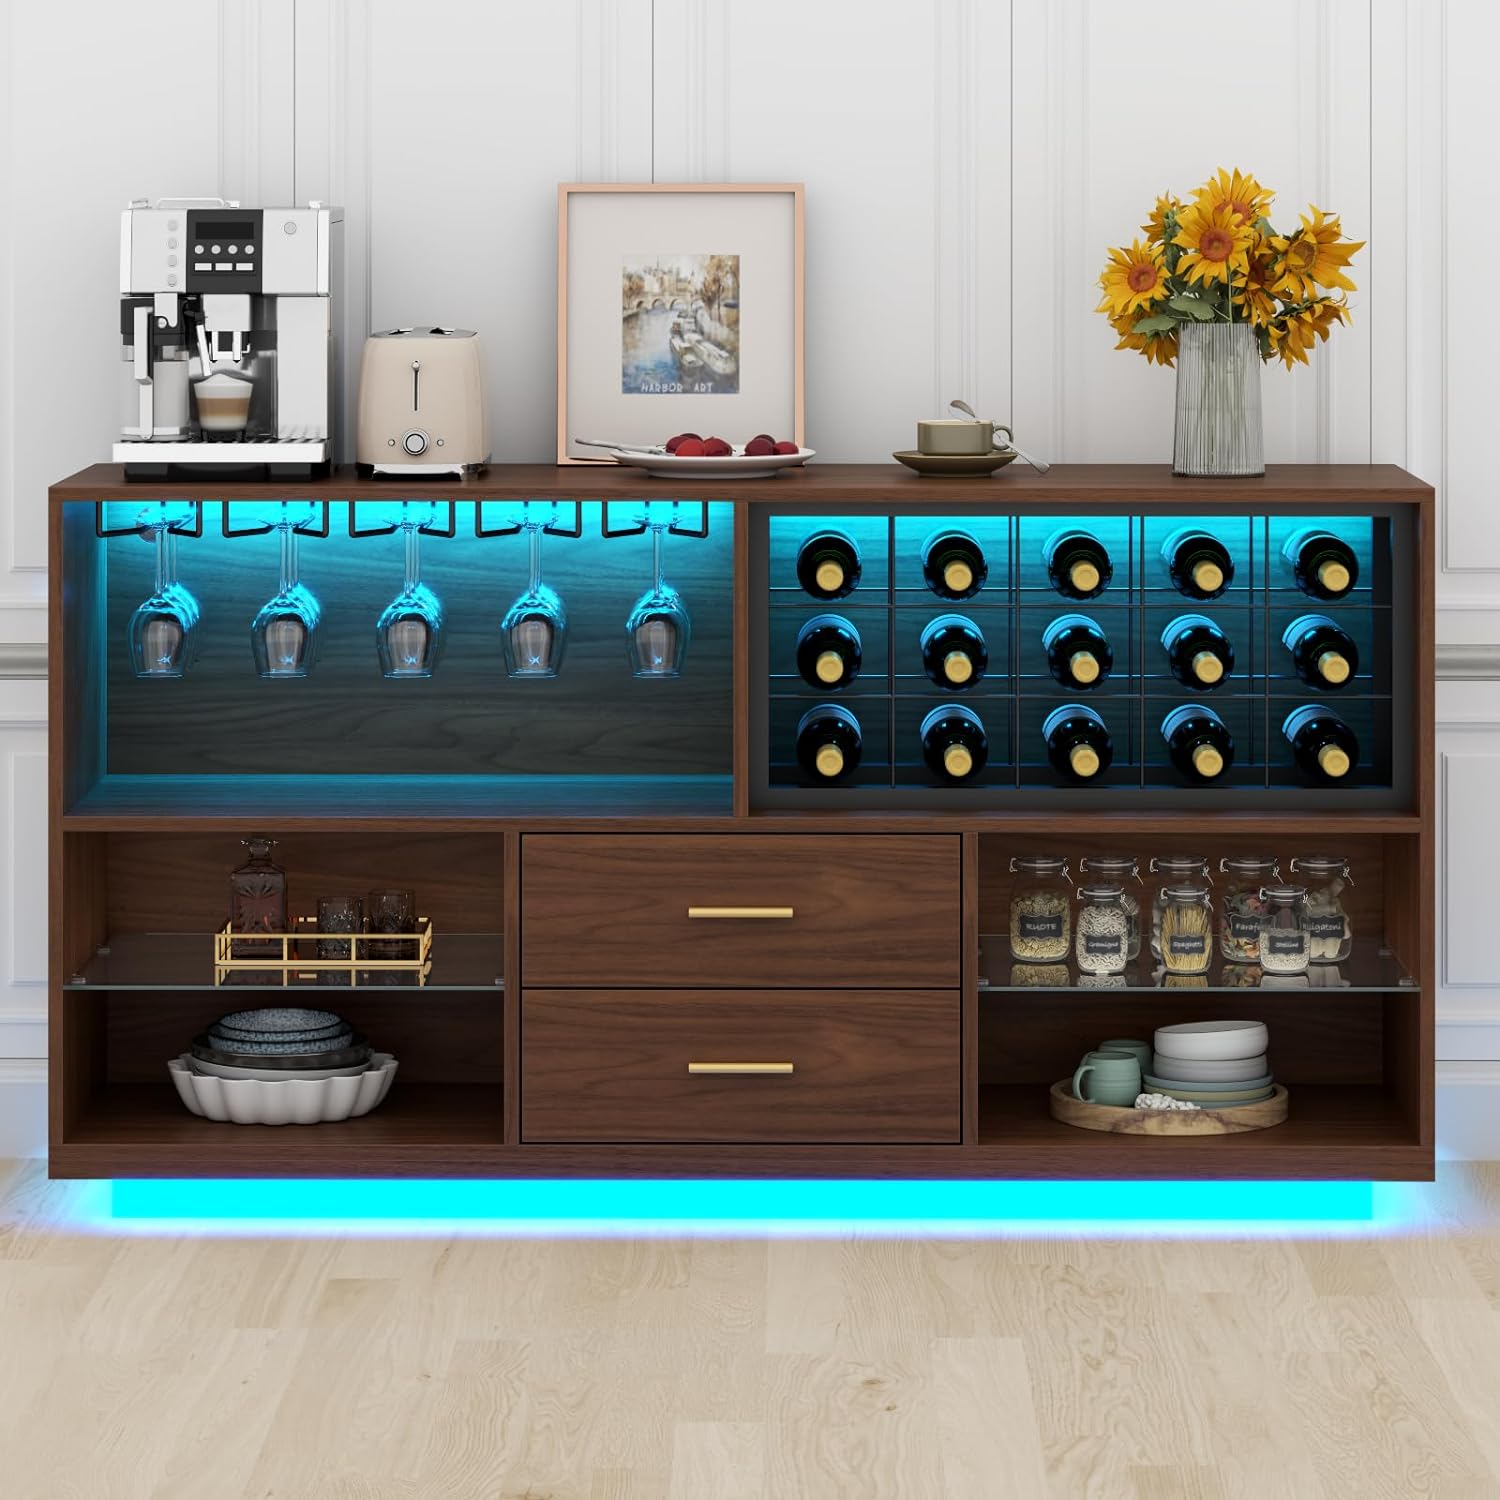 Gyfimoie Wine Bar Cabinet with Drawers and LED Lights - image 2 of 5